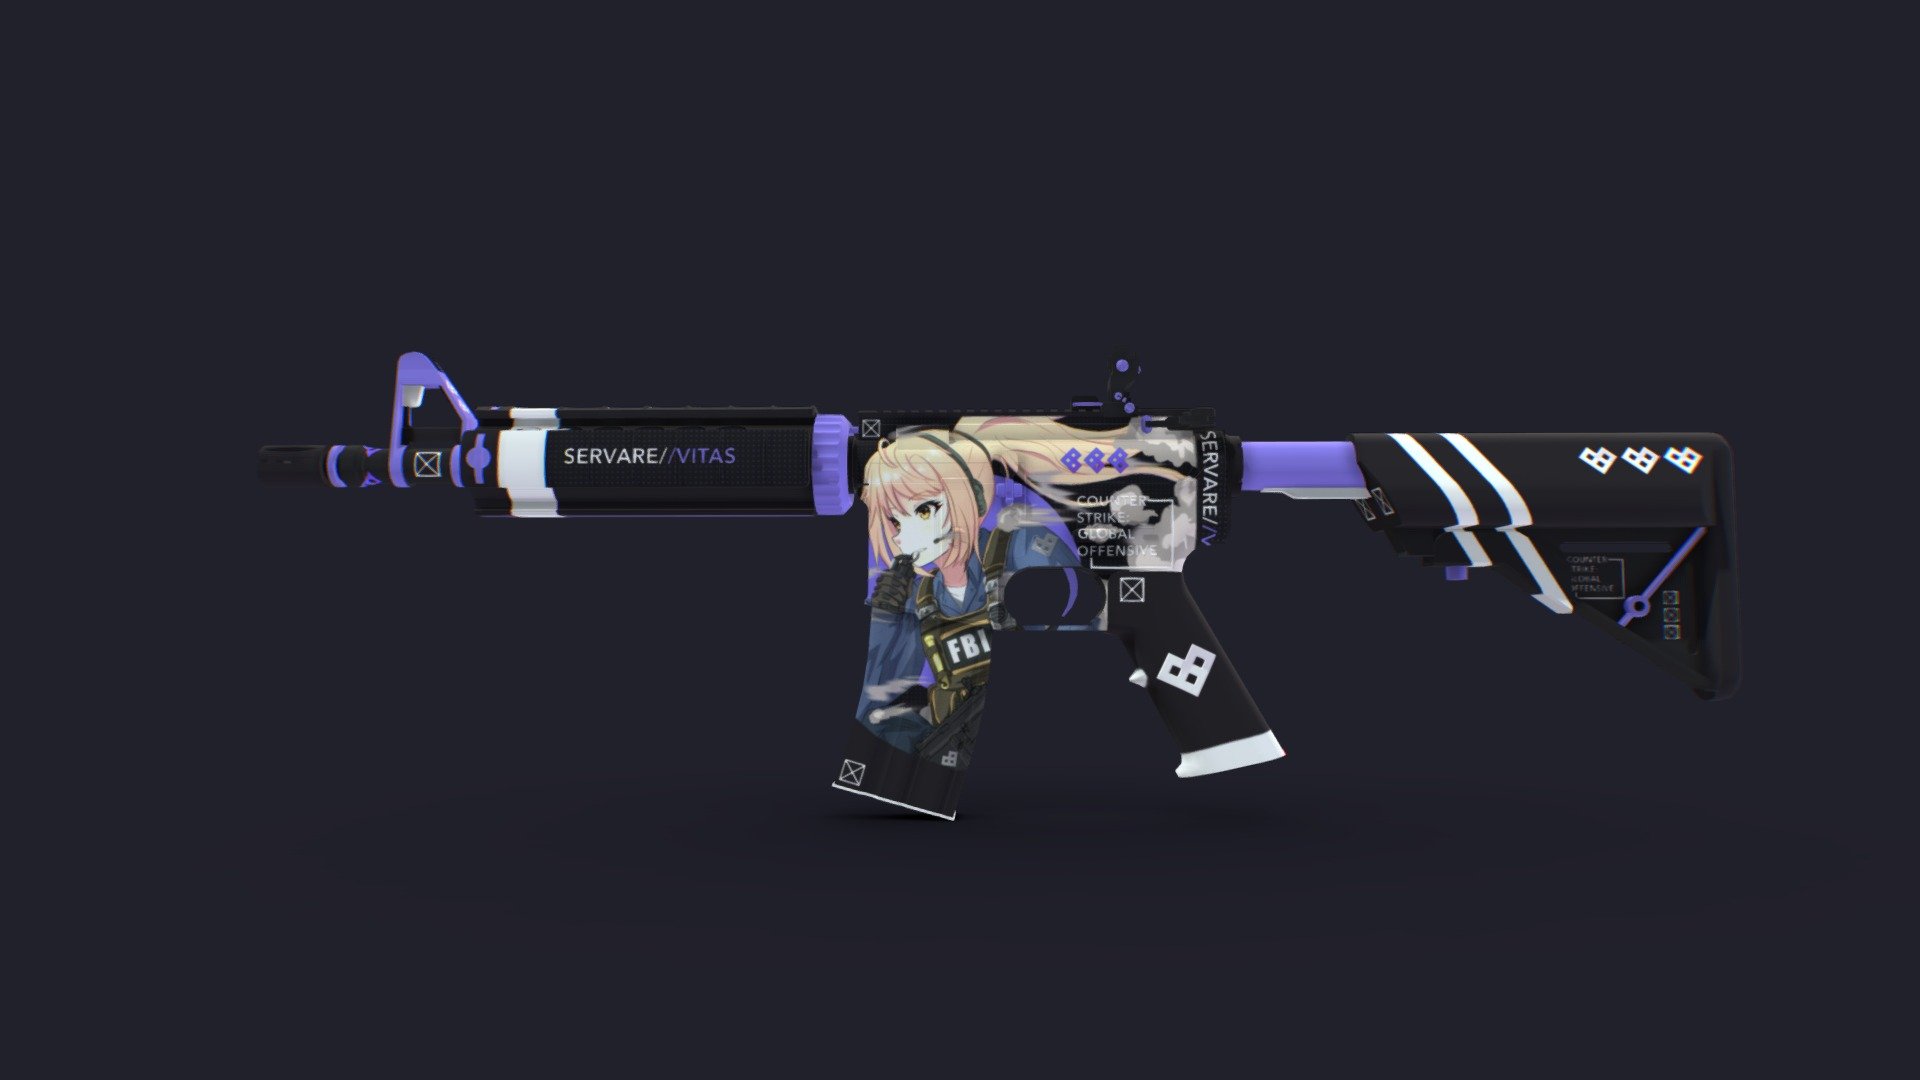 // Skin featuring a tacticool waifu // - M4A4 | Servare//Vitas - 3D model by wimo 3d model